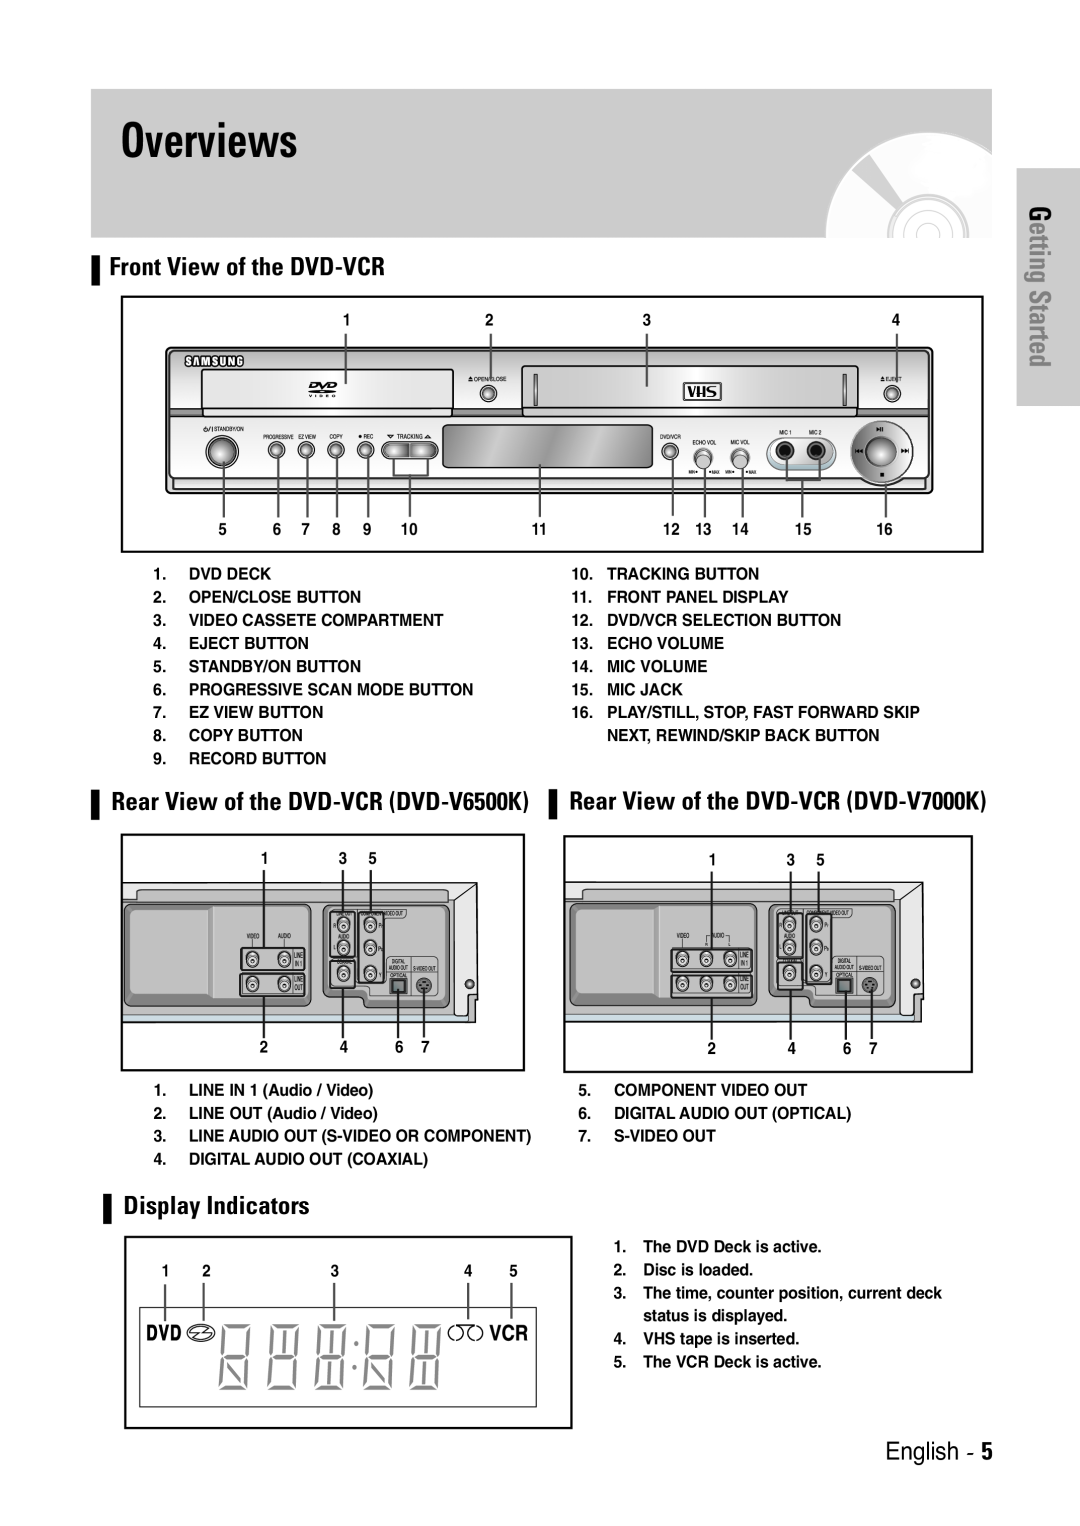 Samsung V6500K Overviews, Front View of the DVD-VCR, Rear View of the DVD-VCR DVD-V7000K, Display Indicators, English 